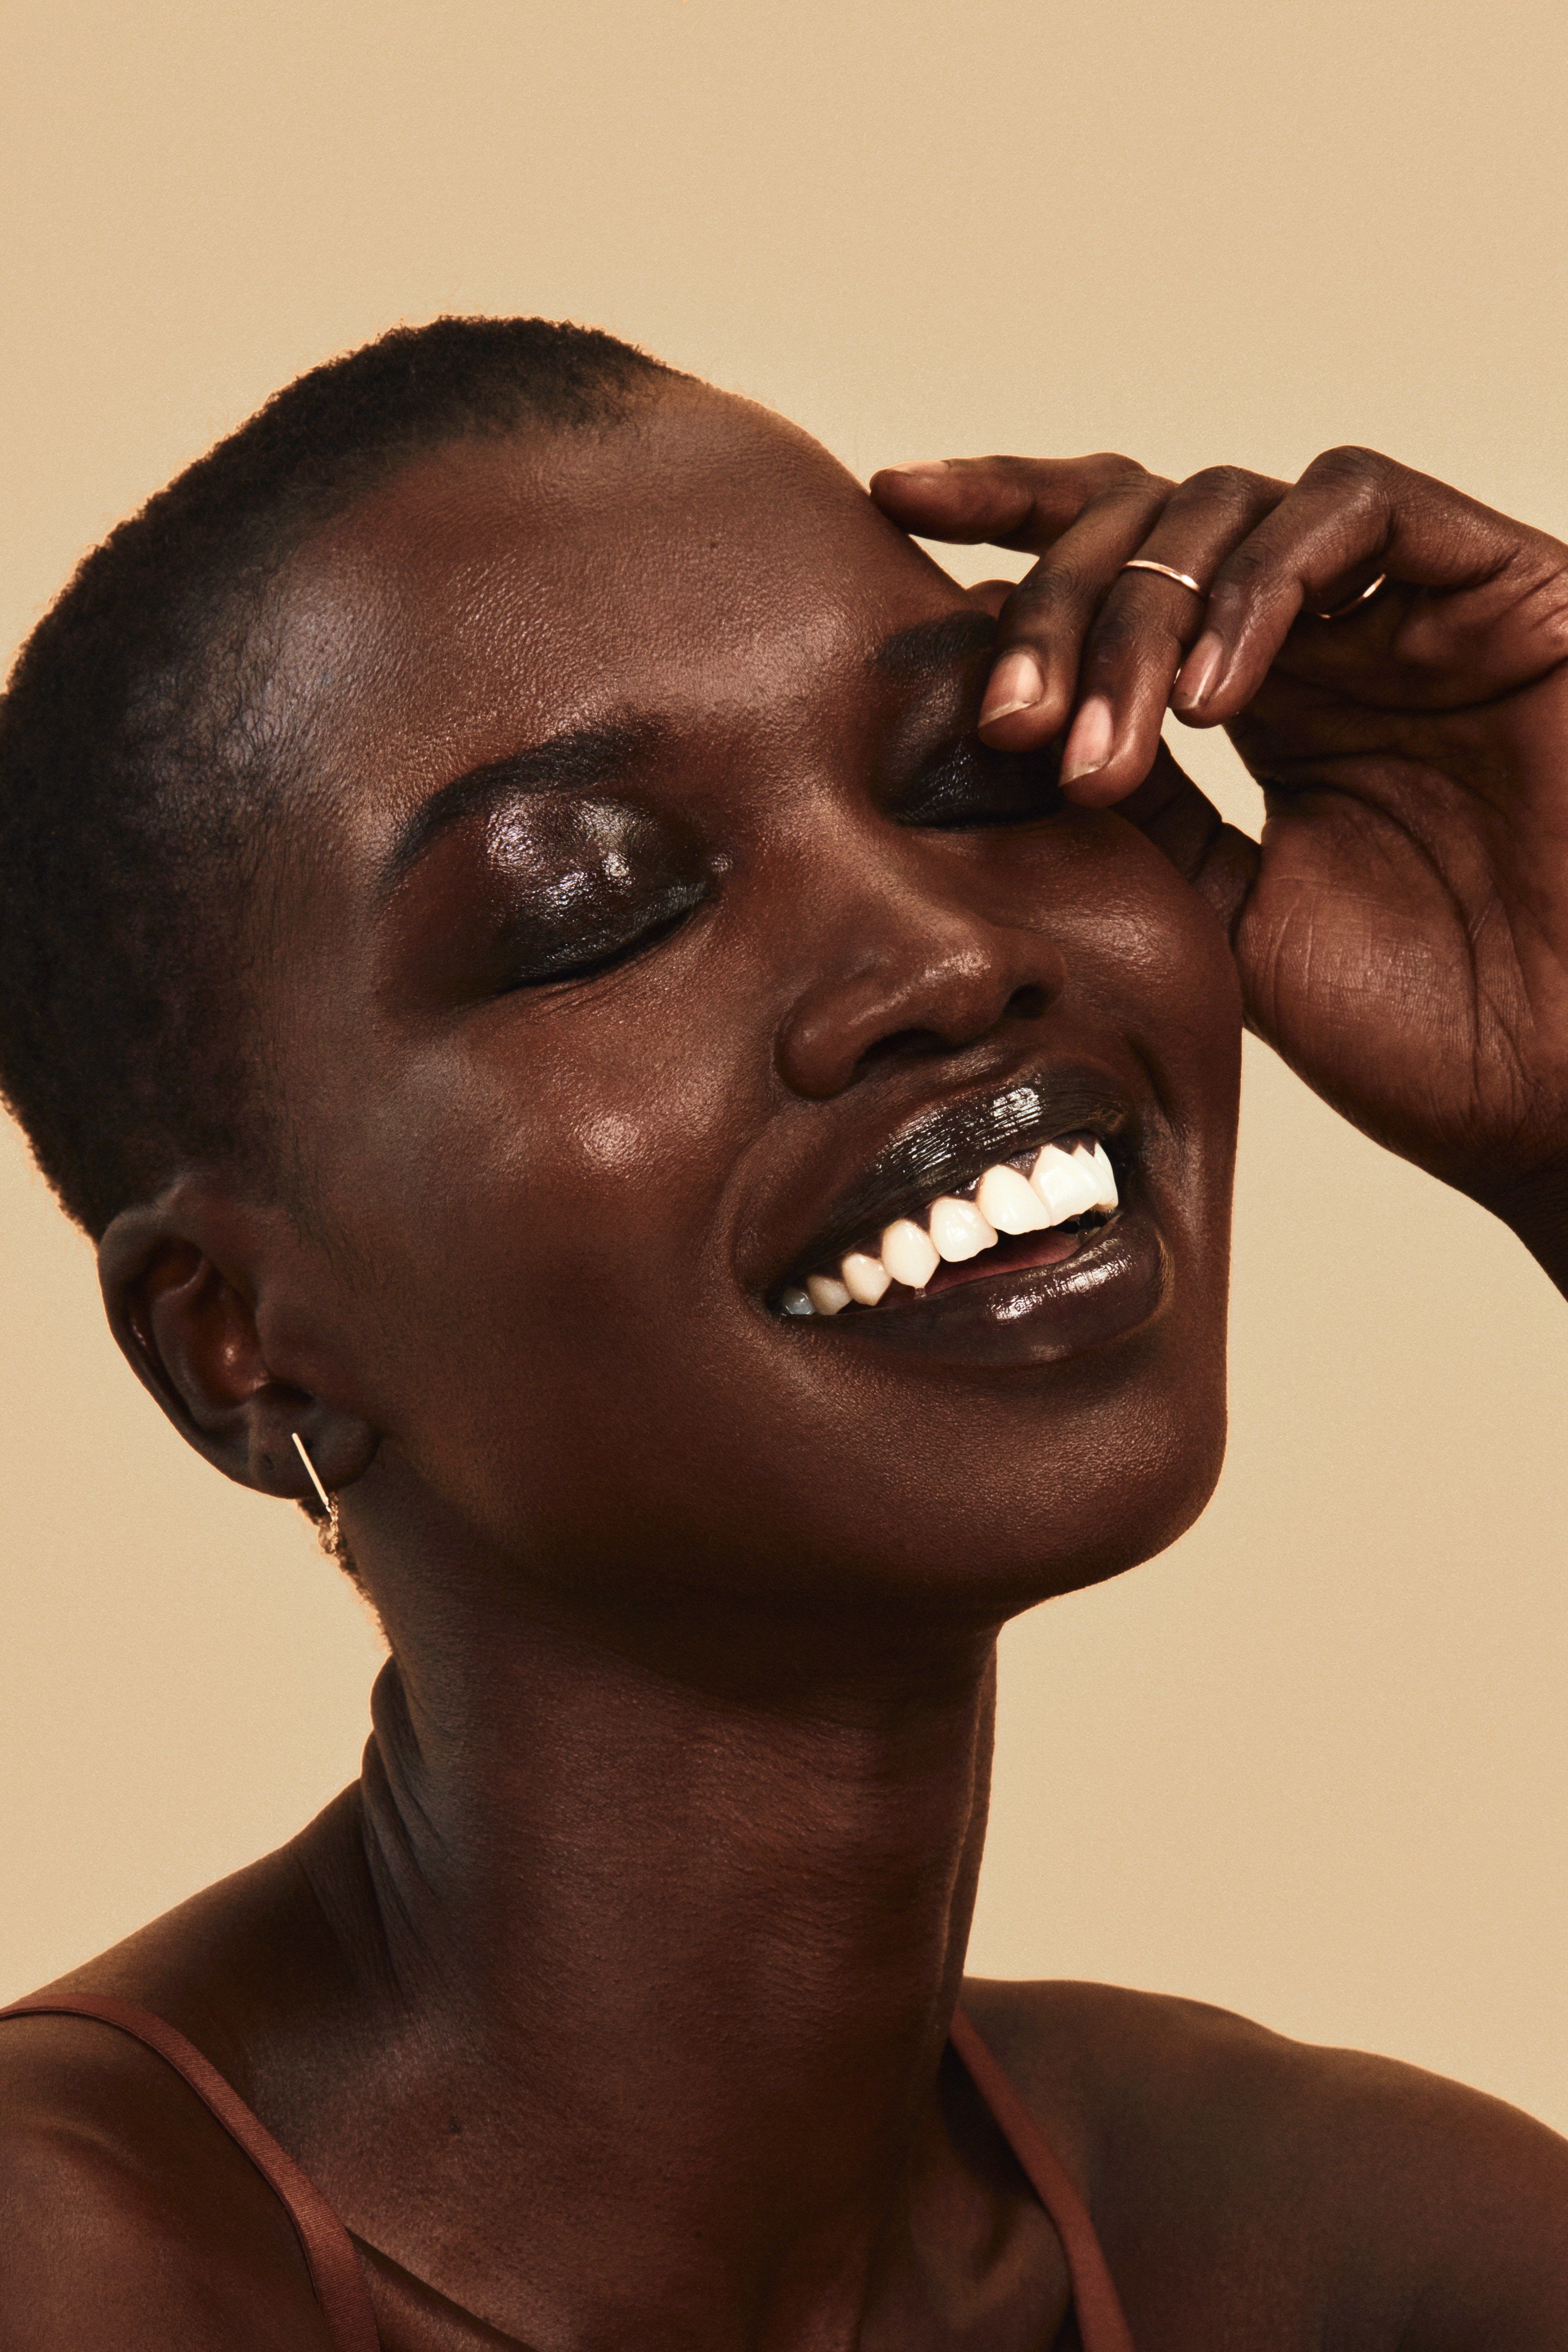 This New Unretouched Beauty Campaign Is Exactly What Women Need to See - This New Unretouched Beauty Campaign Is Exactly What Women Need to See -   25 beauty Black women ideas